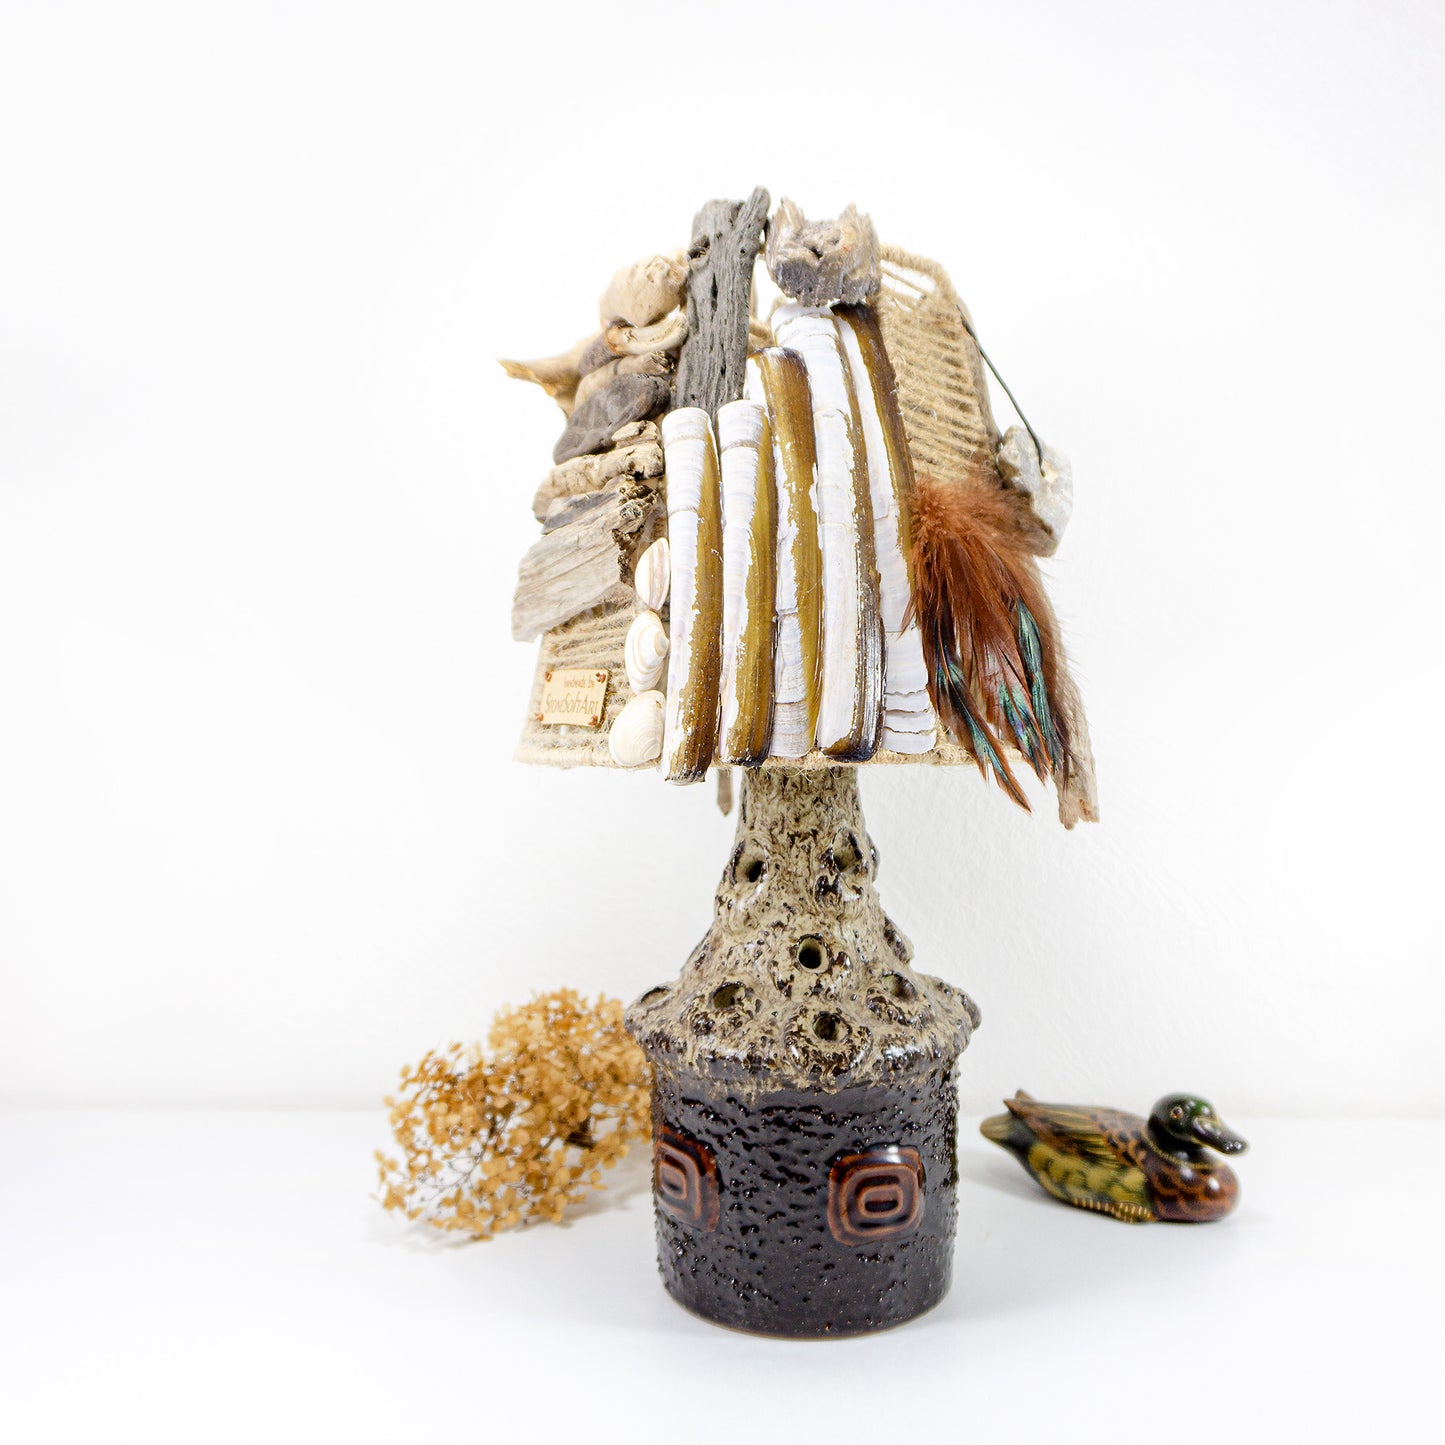 Hand-crafted DRIFTWOOD TABLE LAMP 'Lucia' with Danish midcentury pottery design base, rustic wooden light